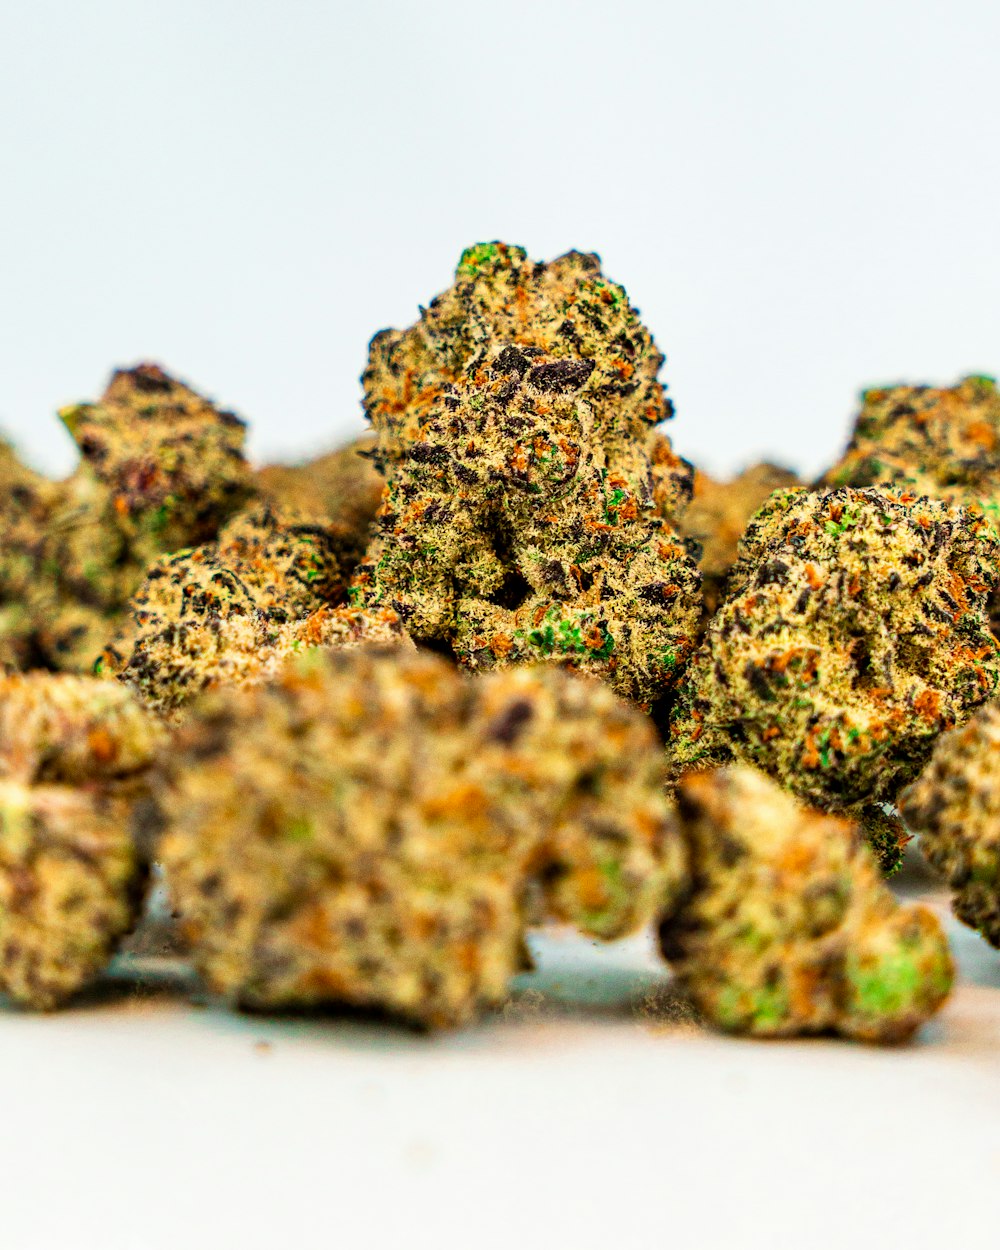 a pile of marijuana buds sitting on top of a white table